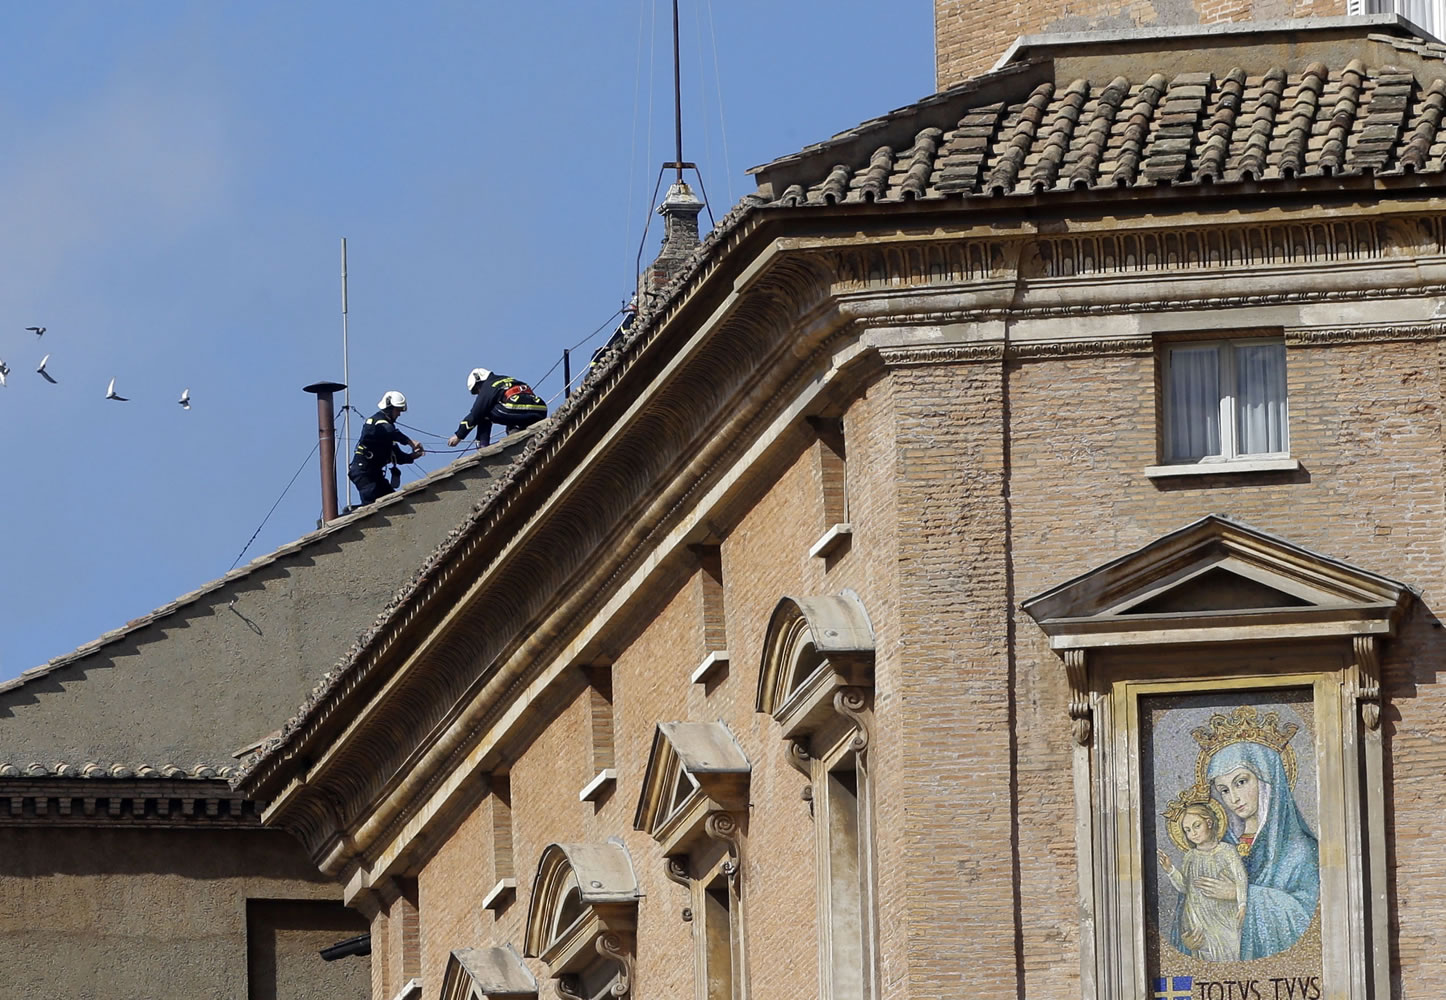 Firefighters place the chimney on the roof of the Sistine Chapel, where cardinals will gather to elect the new pope, at the Vatican, on Saturday.